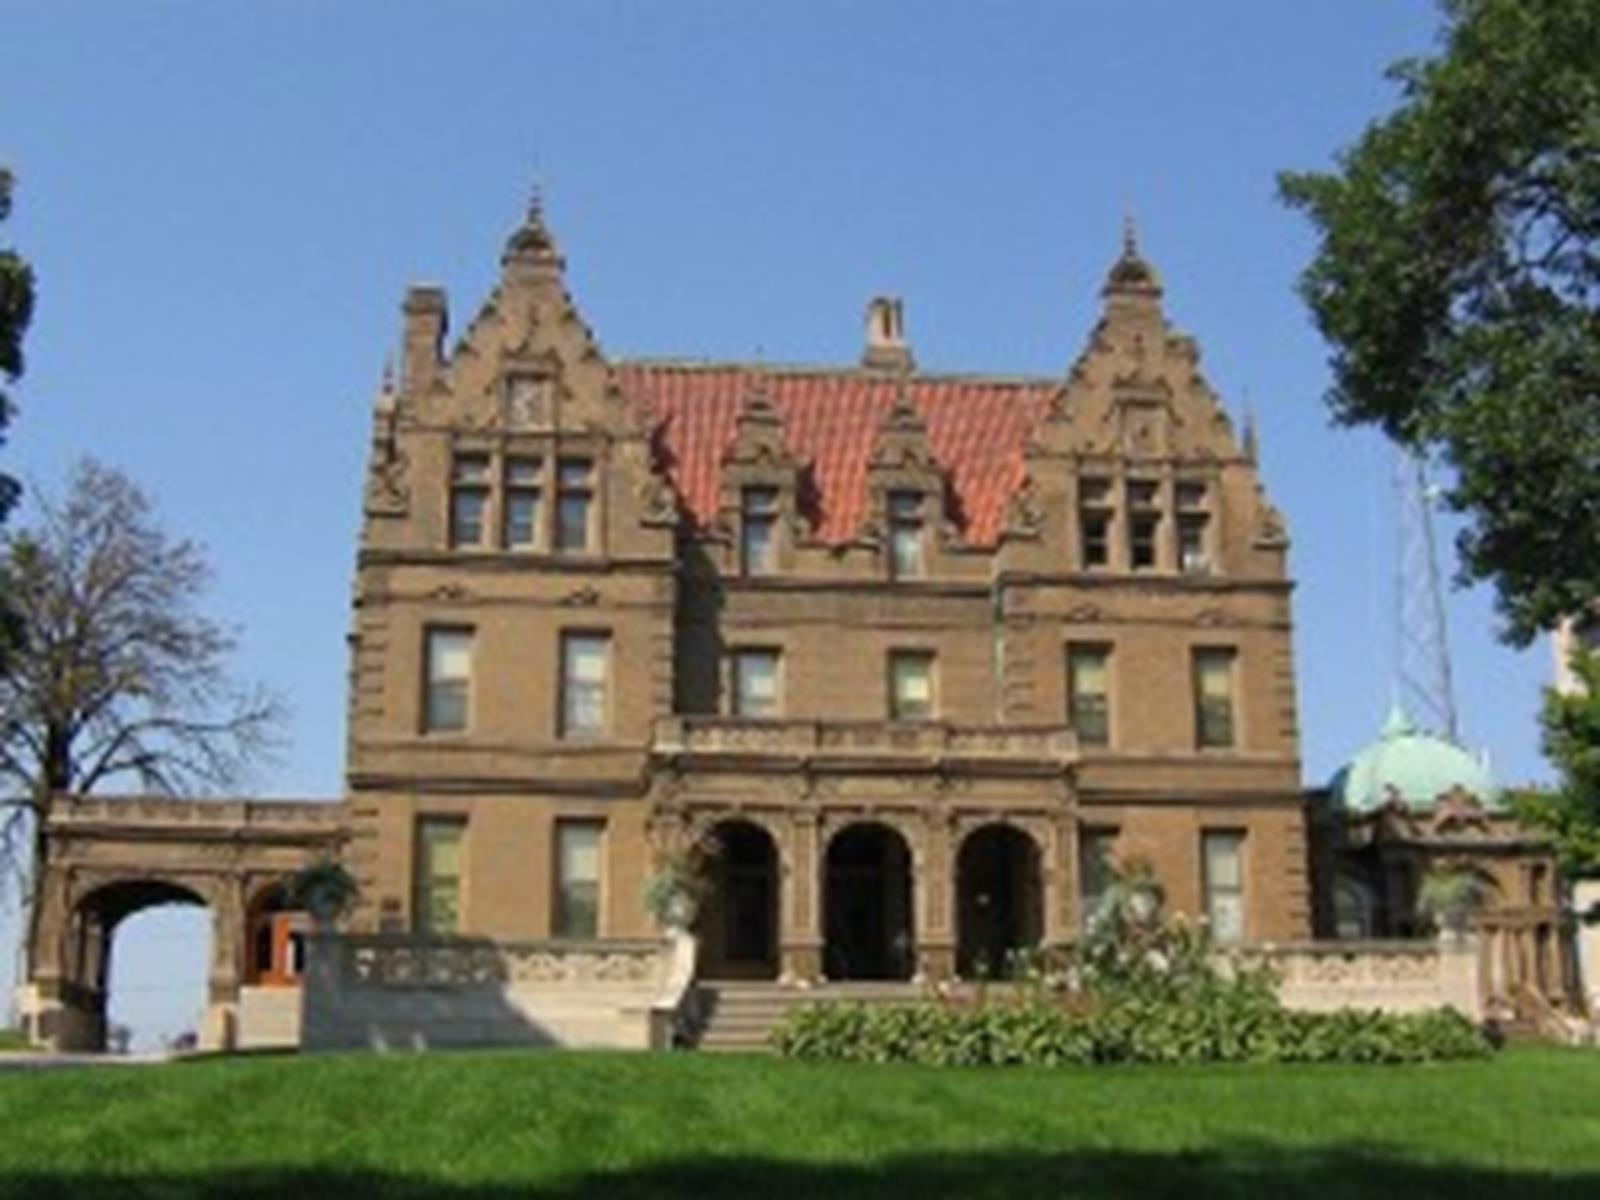 Captain Frederick Pabst Mansion